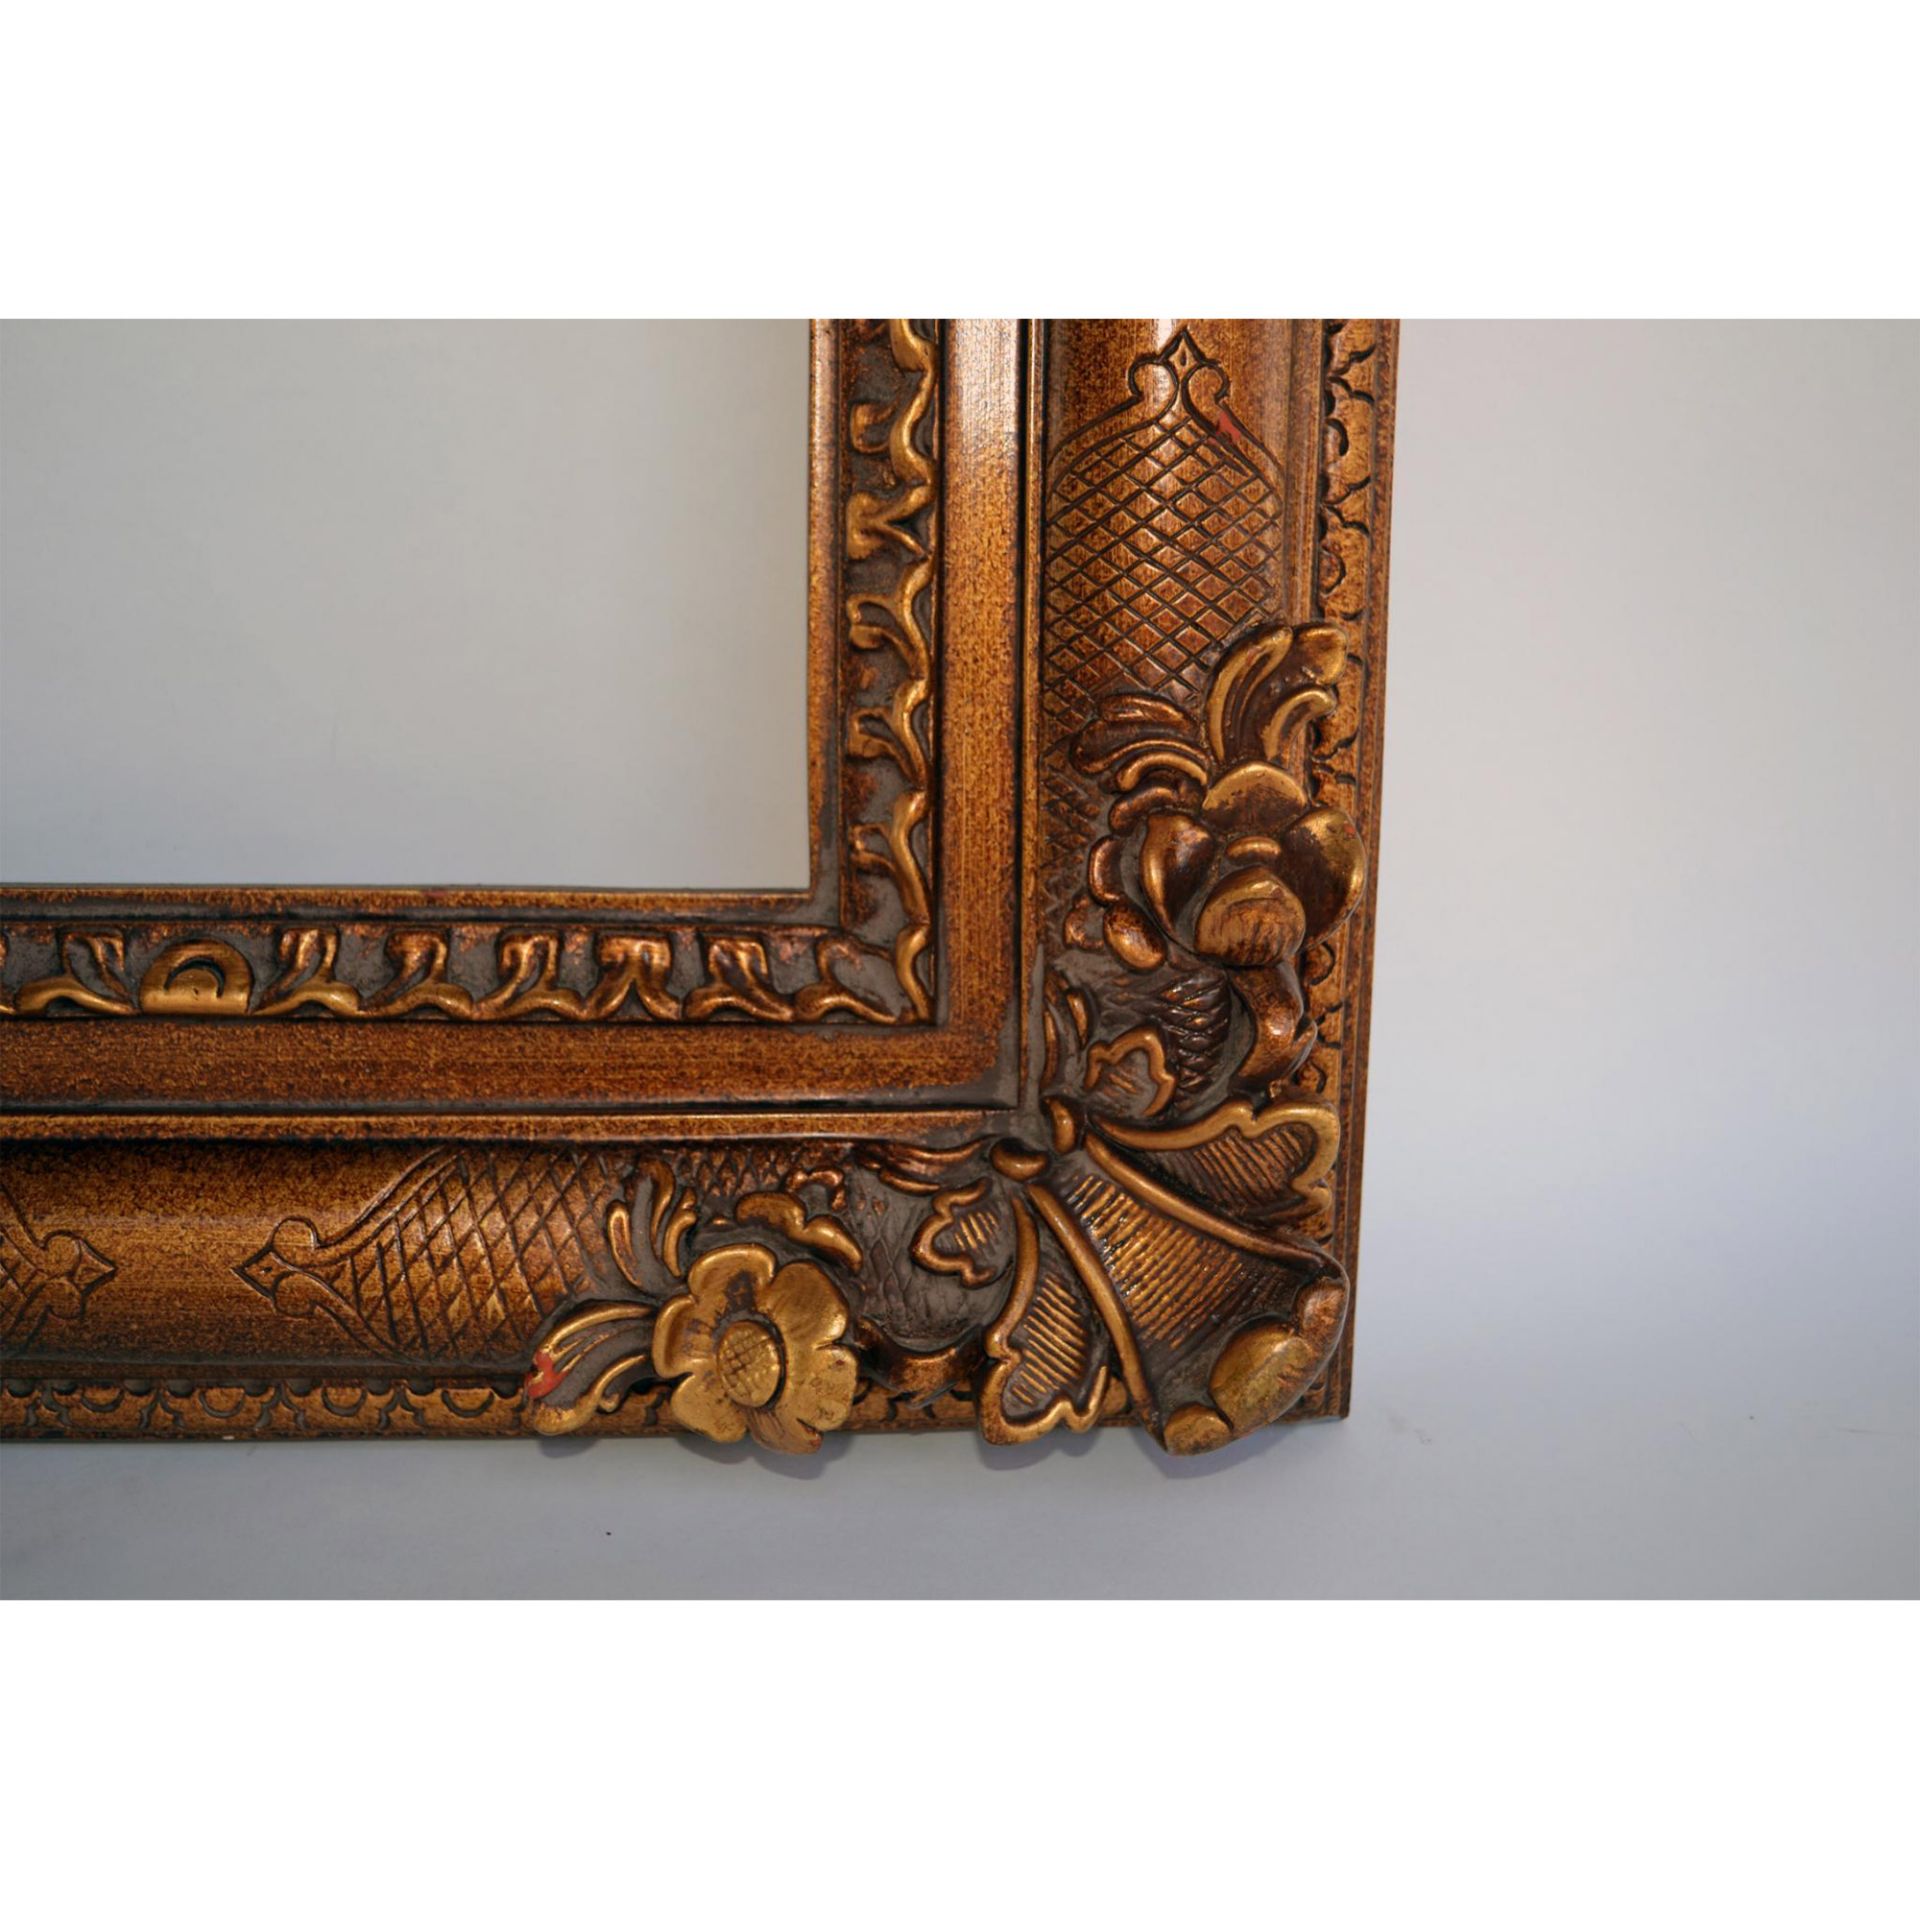 Gold Ornate Classic Frame, 27"H - Image 2 of 3